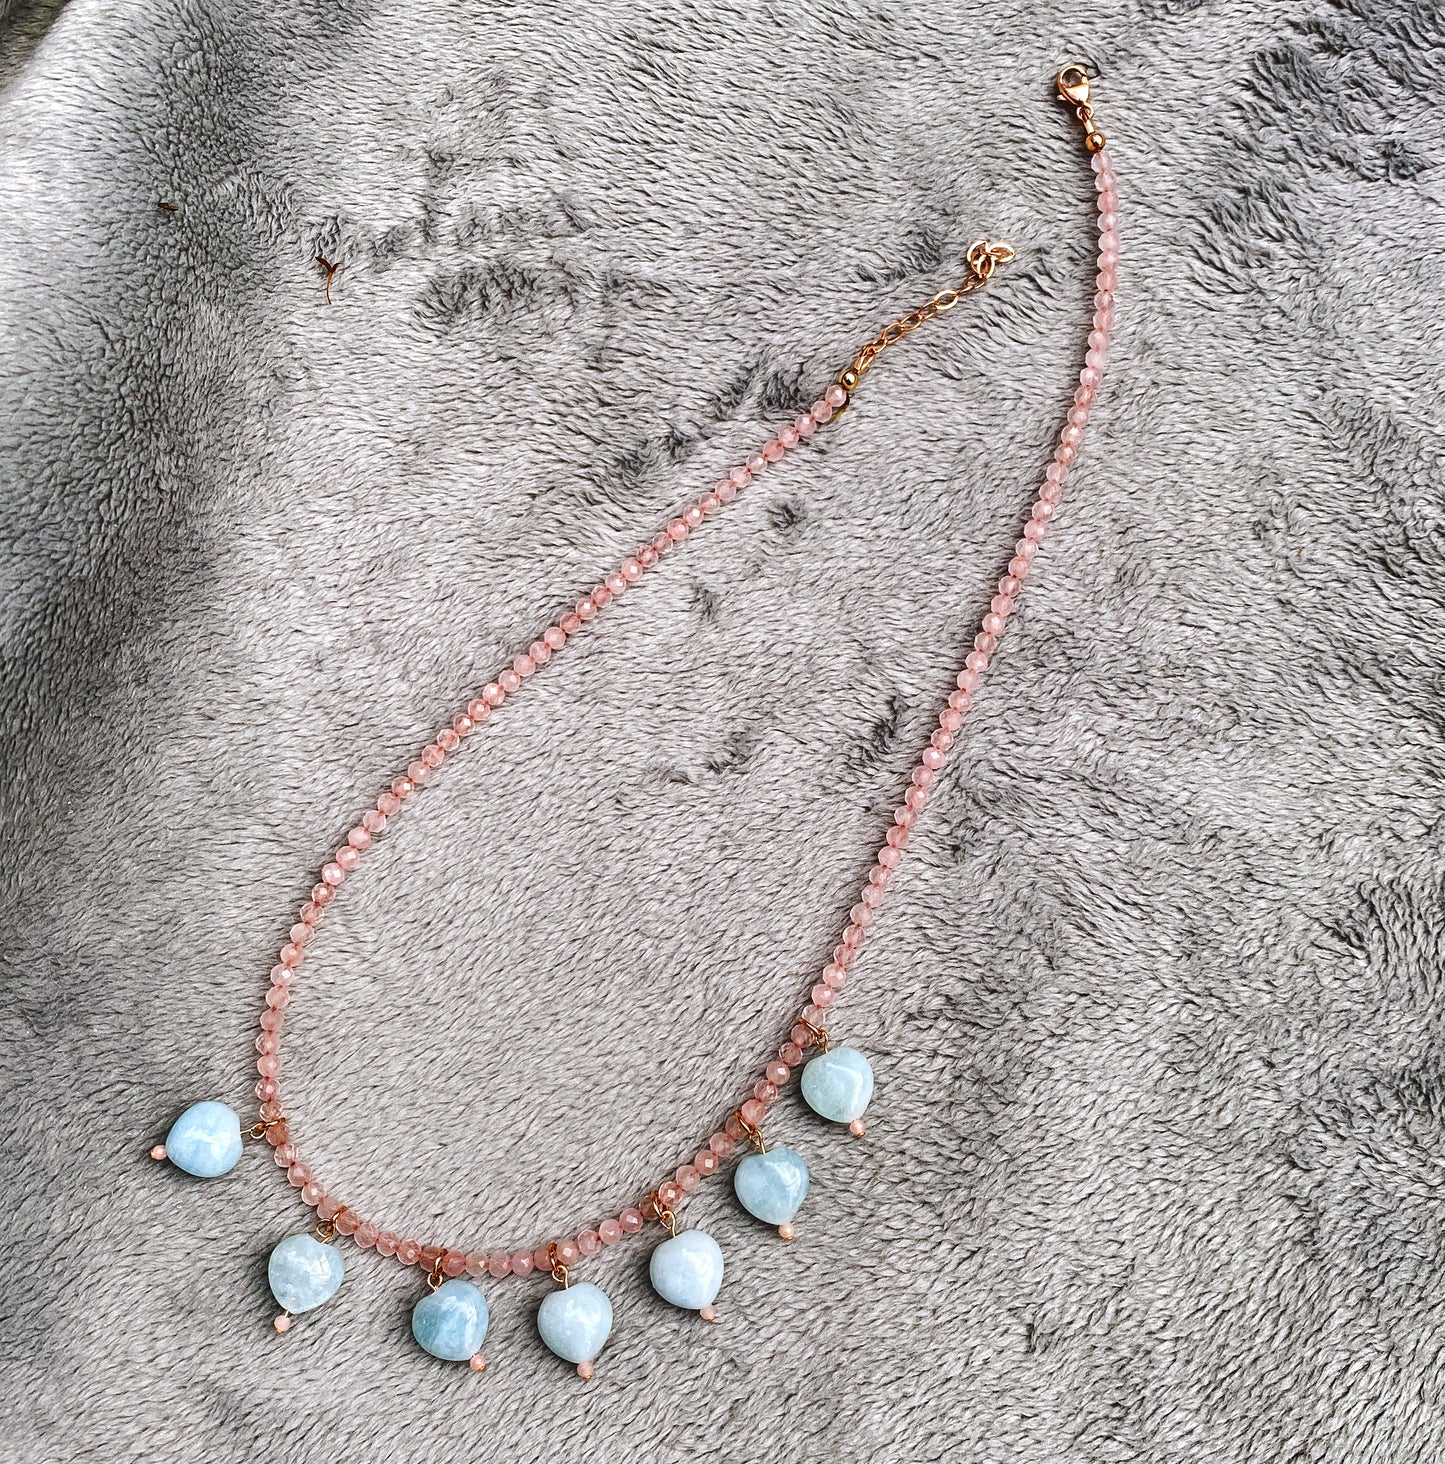 Aquamarine Hearts and Rose Quartz Gemstone with 14 kt rose gold fill Necklace